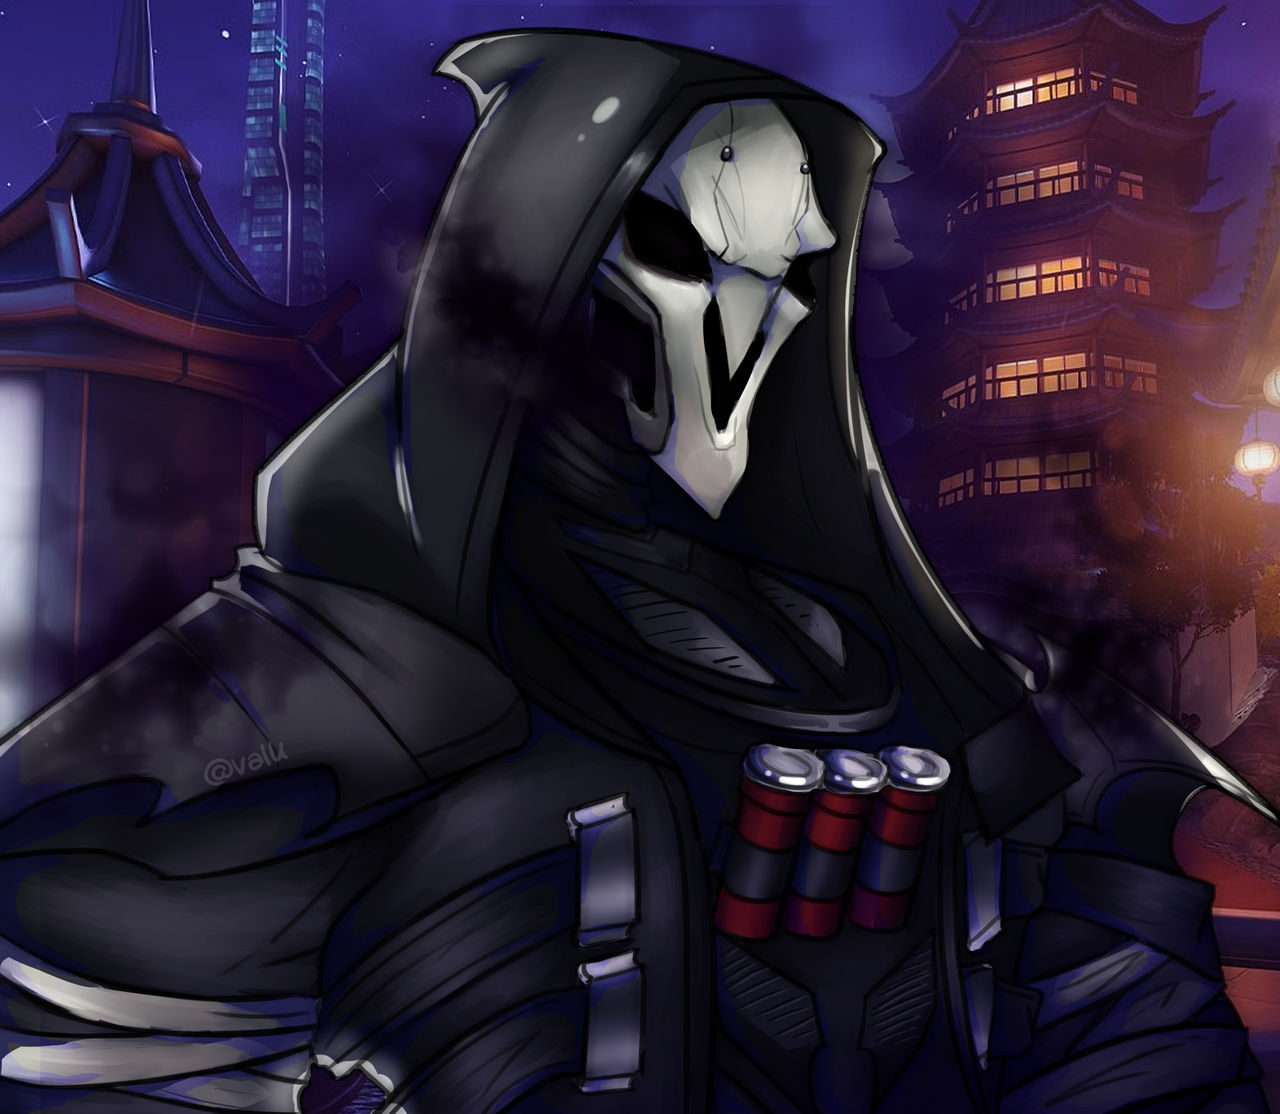 Ow1 Reaper by ThatOneValk on DeviantArt